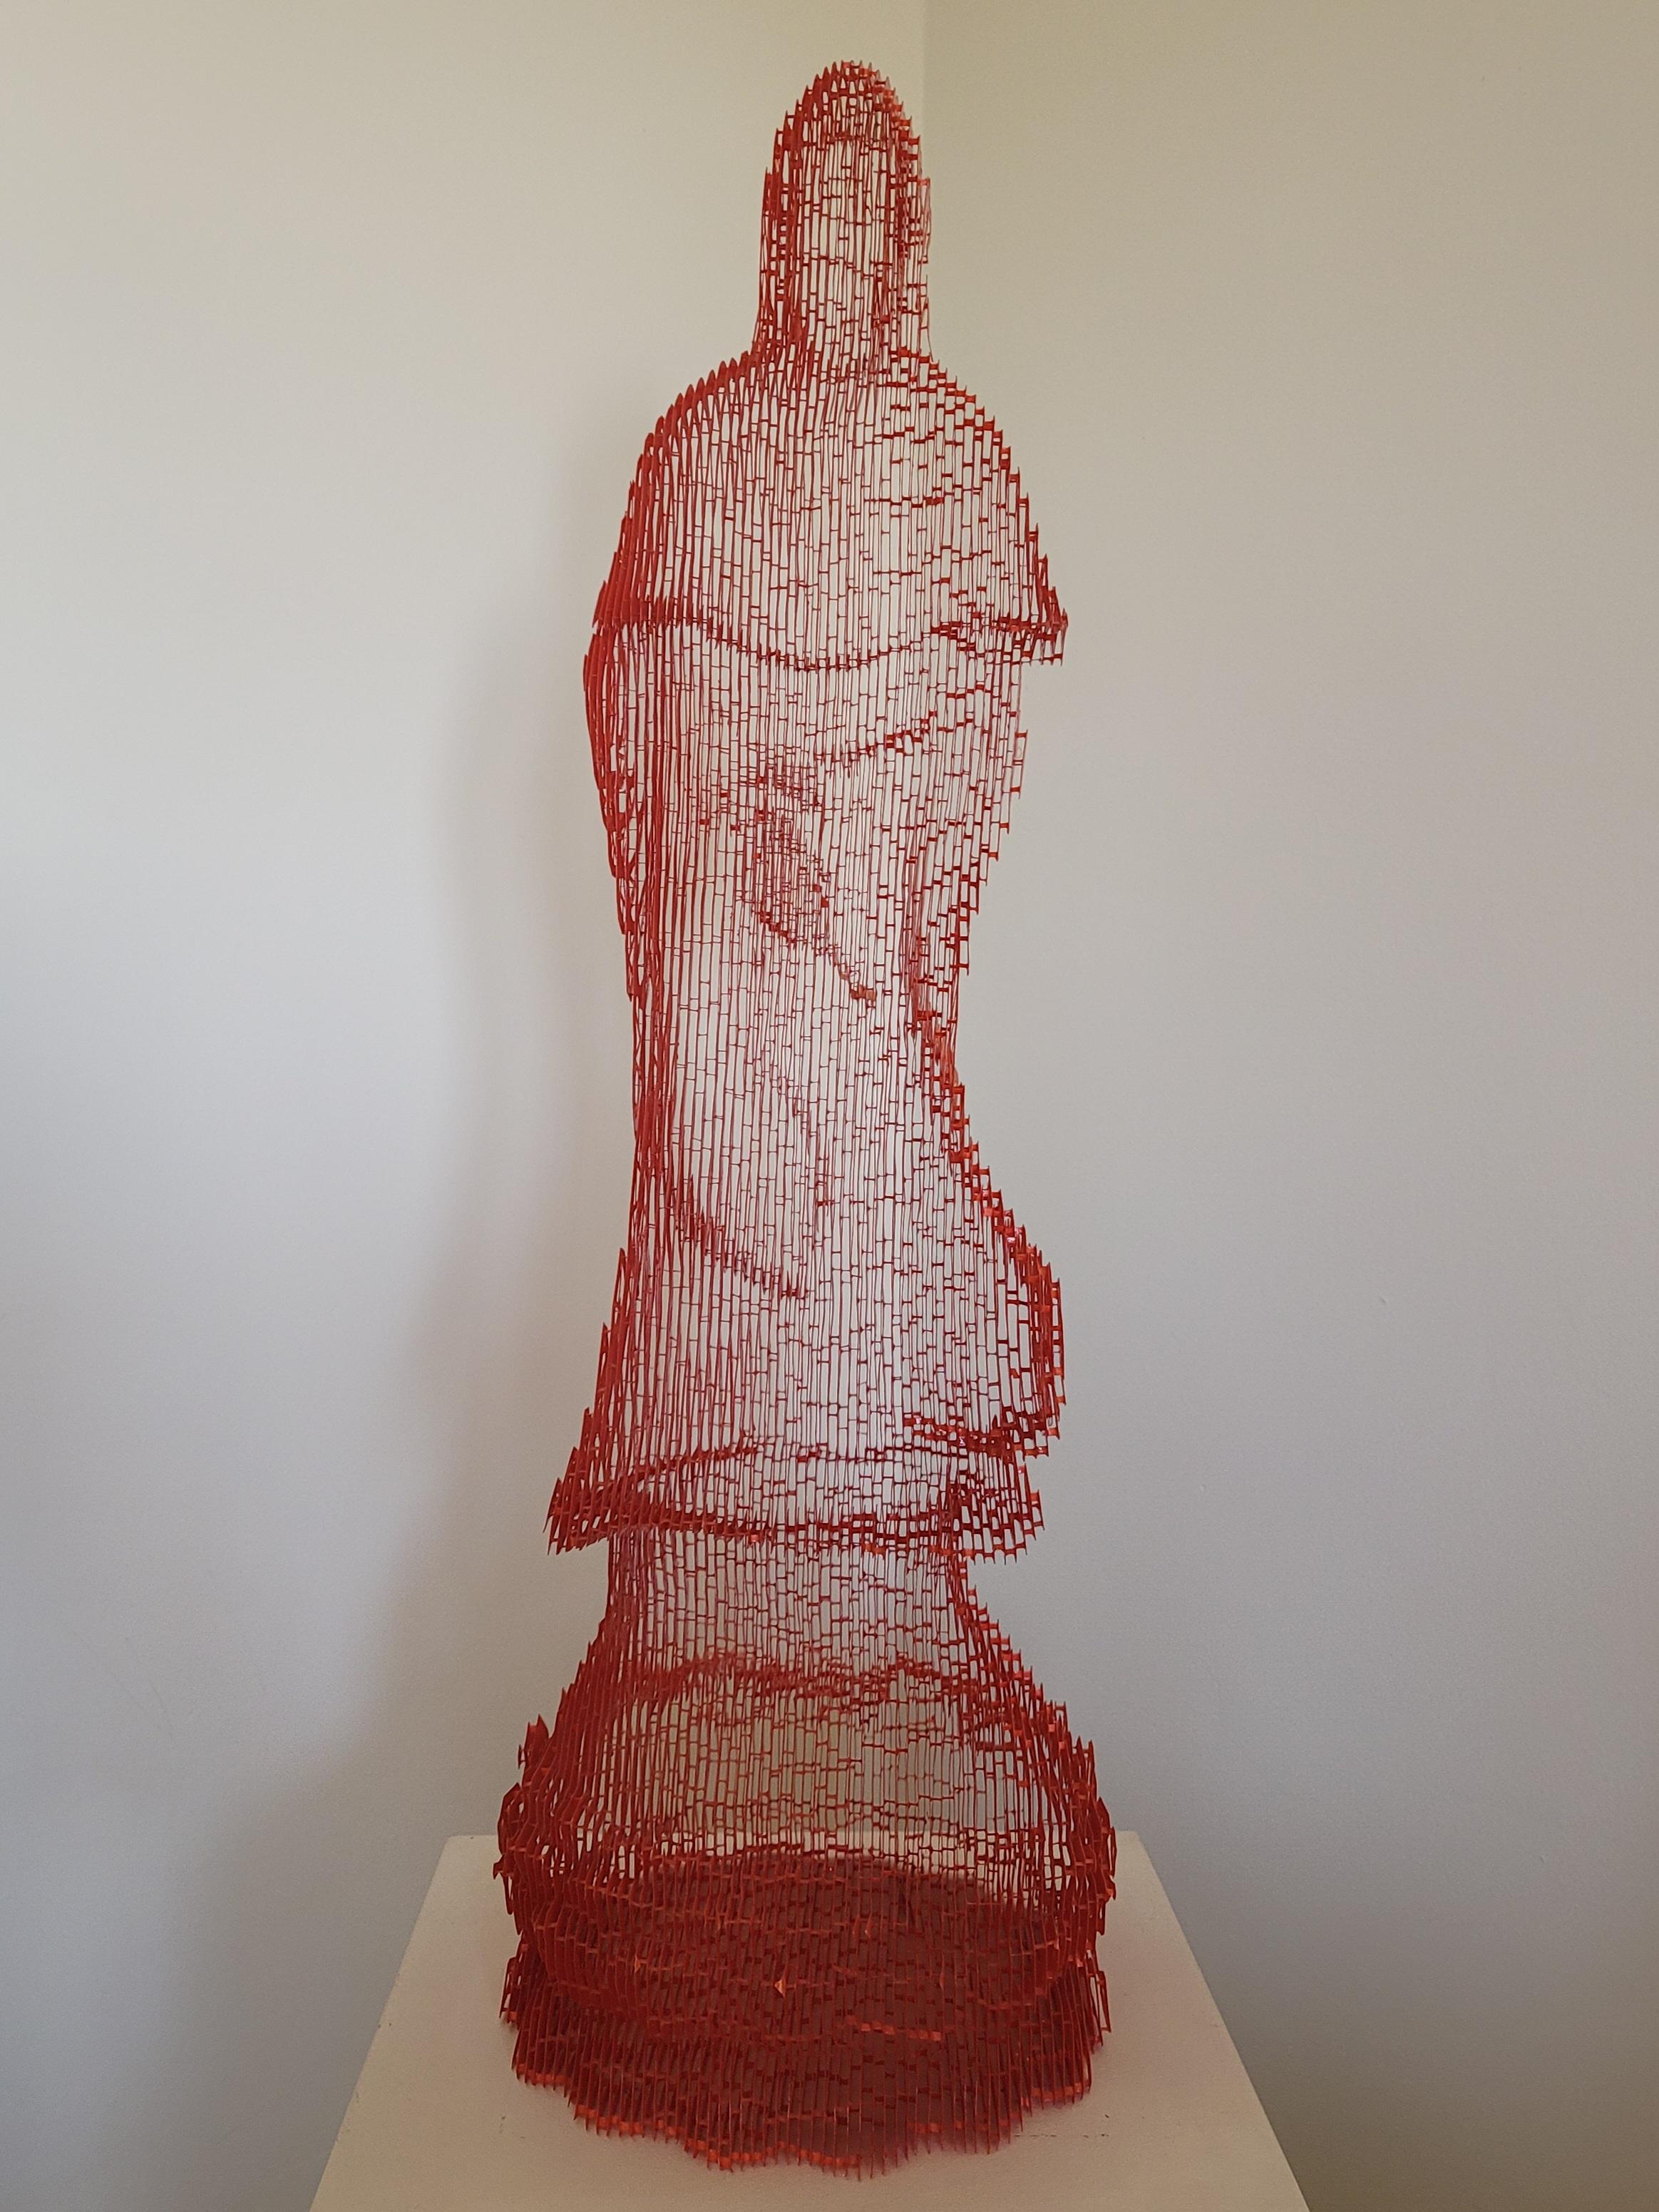 There is No Essence: Guan-In Bodhisattva, RED - Sculpture by Shin Ho Yoon